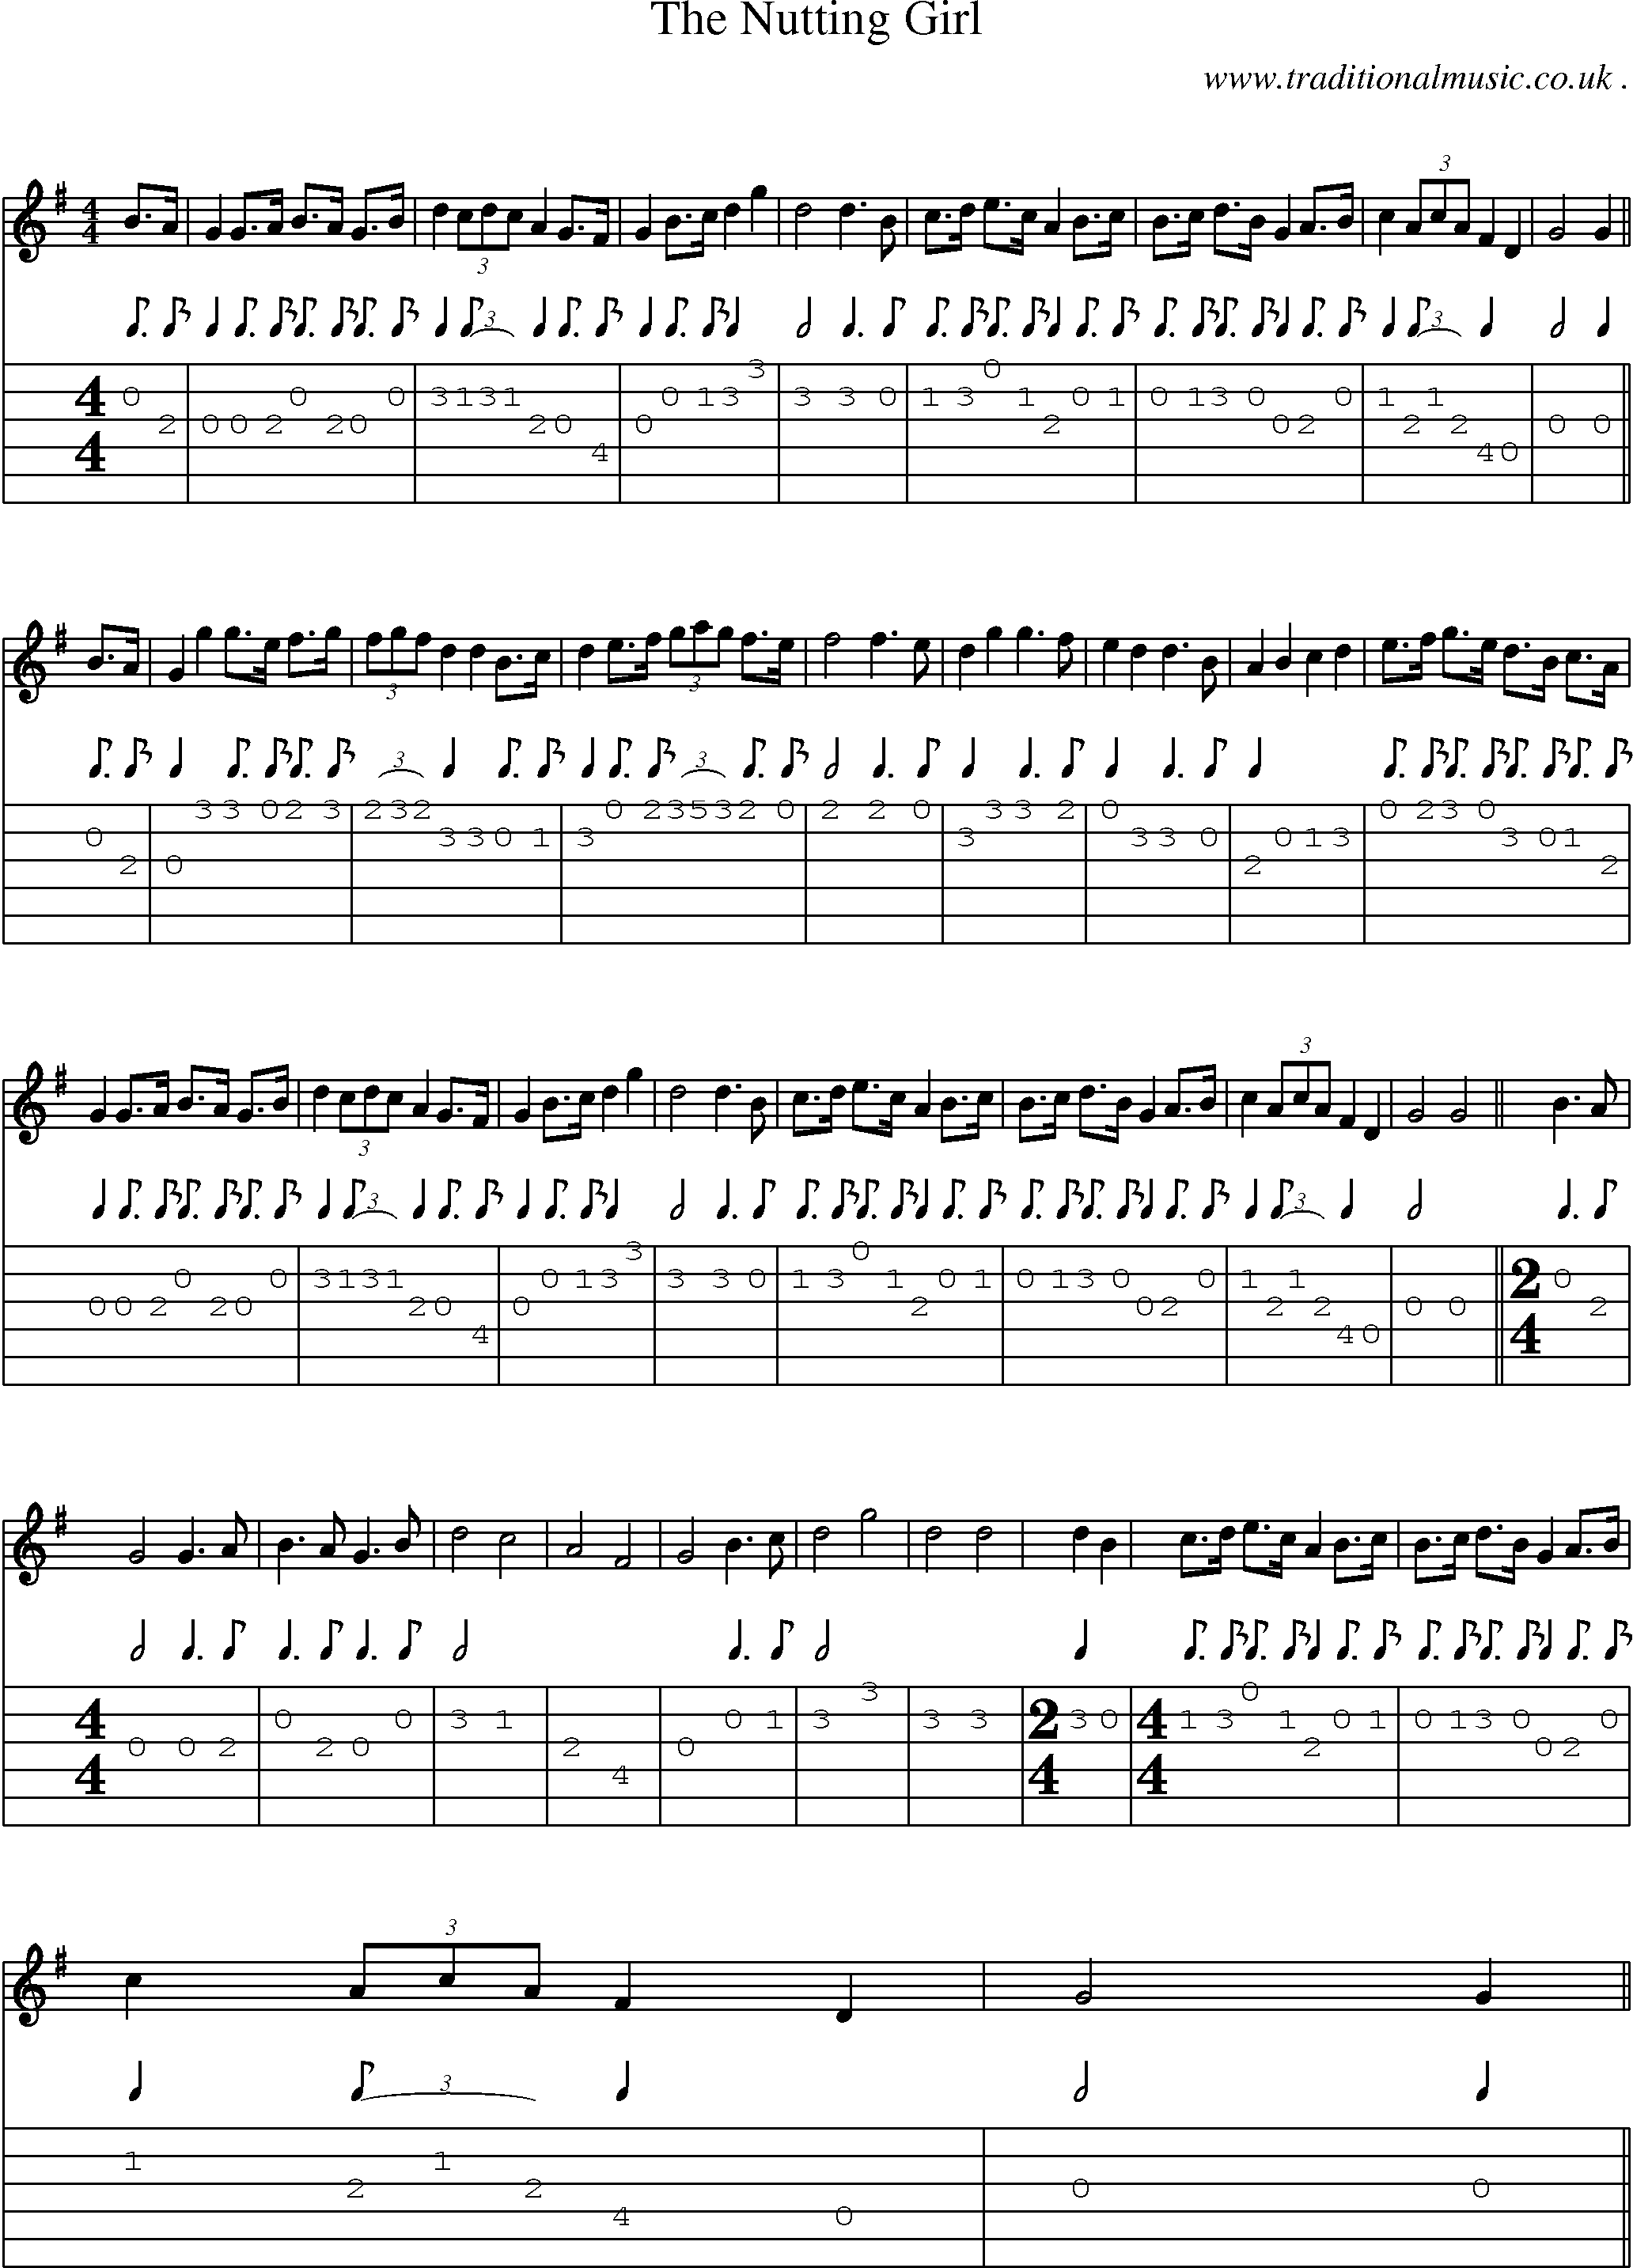 Sheet-Music and Guitar Tabs for The Nutting Girl